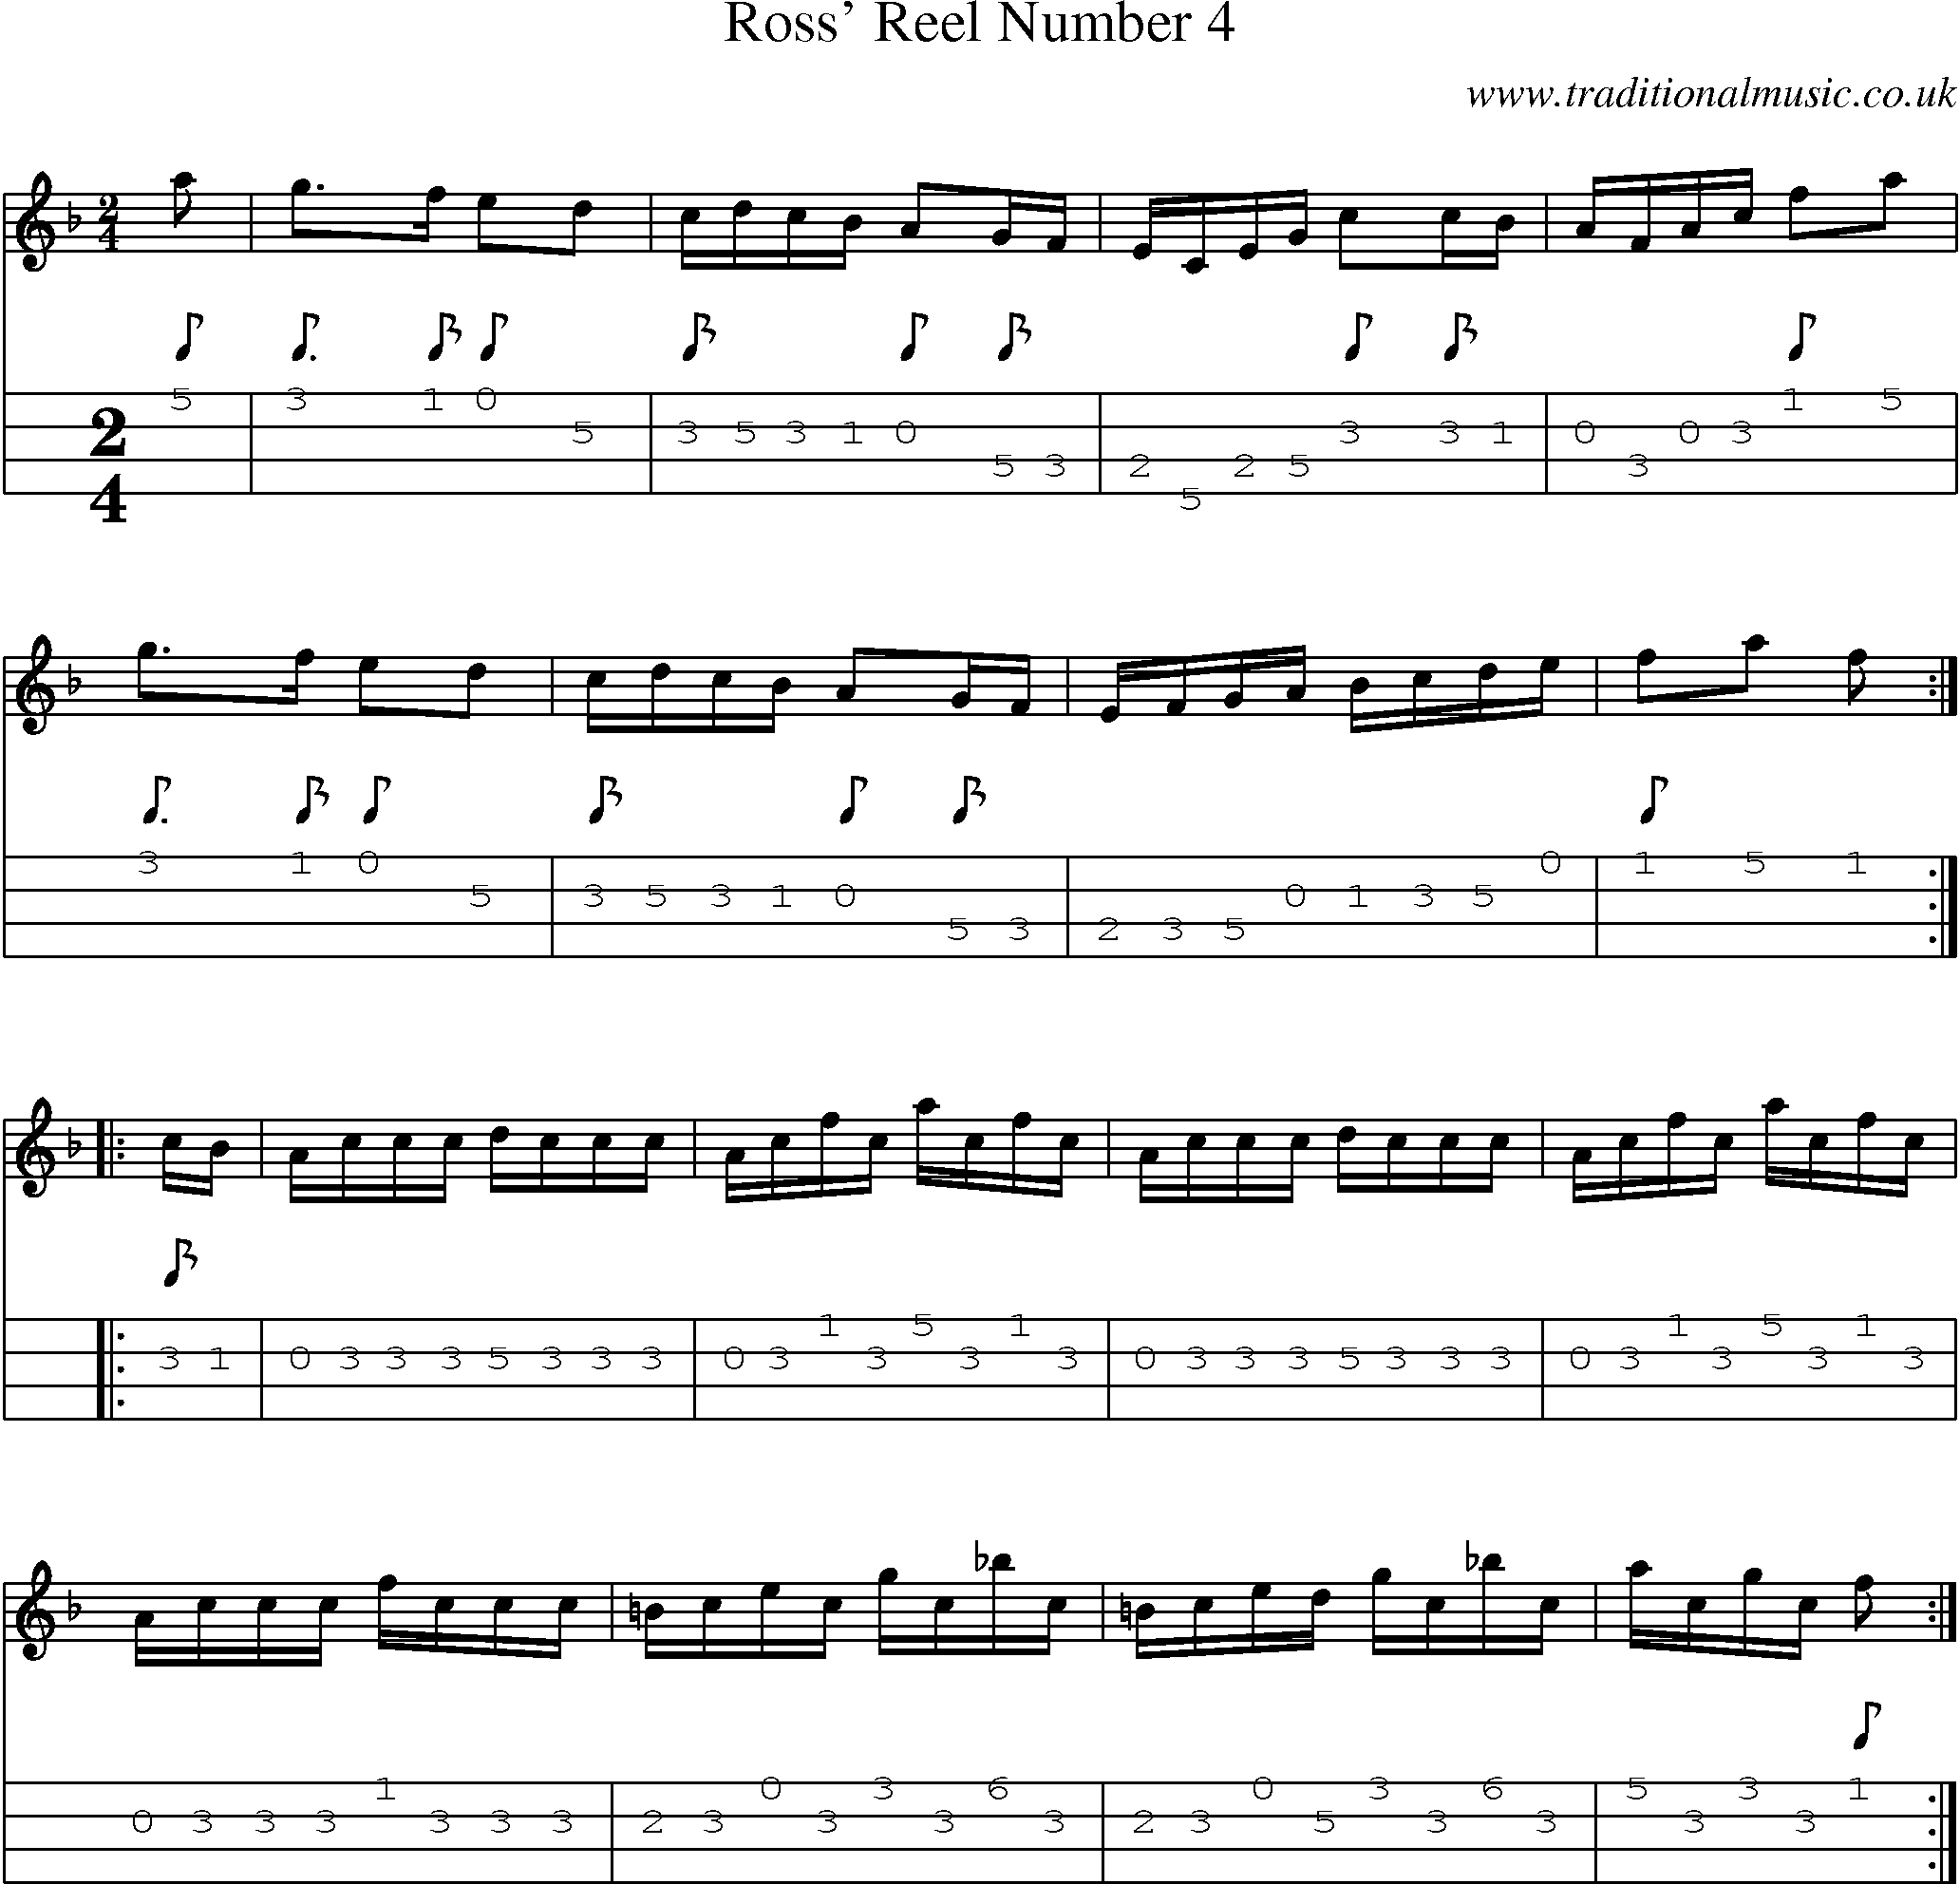 Music Score and Mandolin Tabs for Ross Reel Number 4